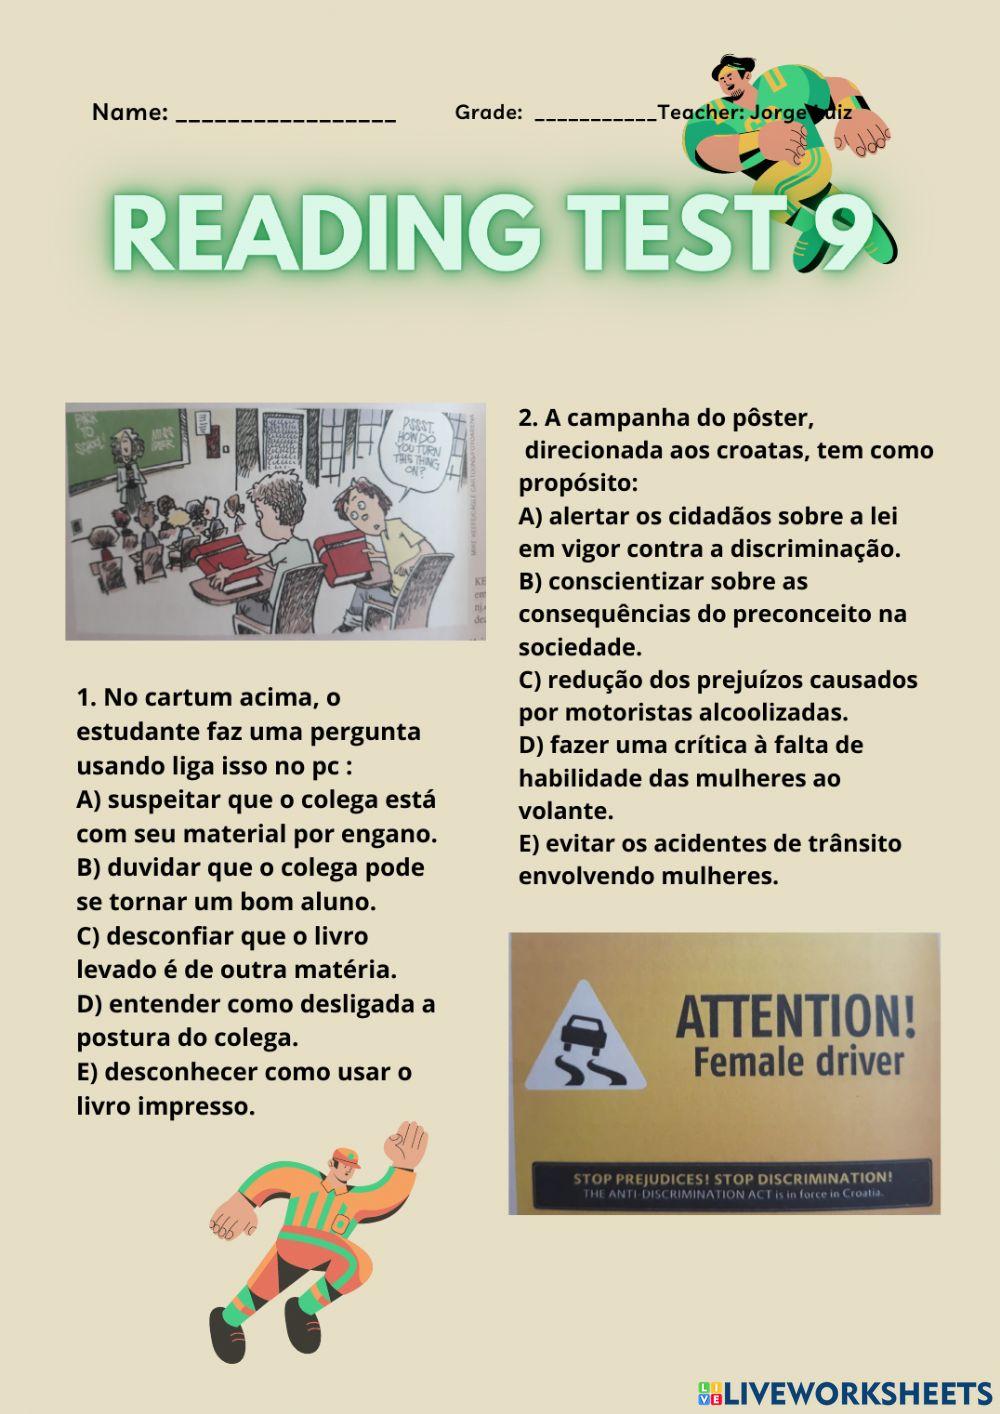 Reading test interactive activity for Médio | Live Worksheets